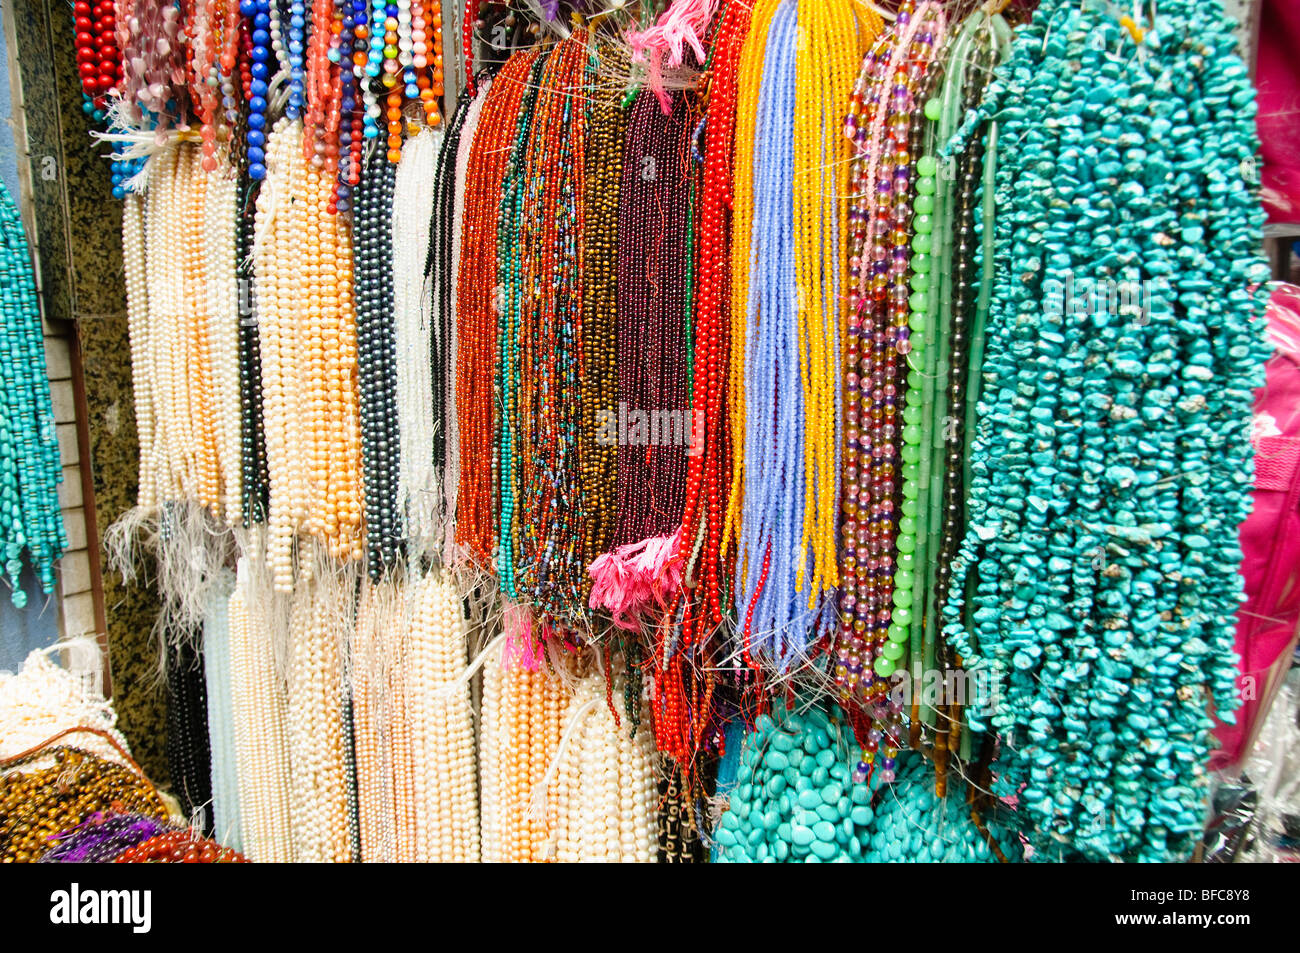 Colored String For Sale In Bangkok, Thailand Stock Photo, Picture